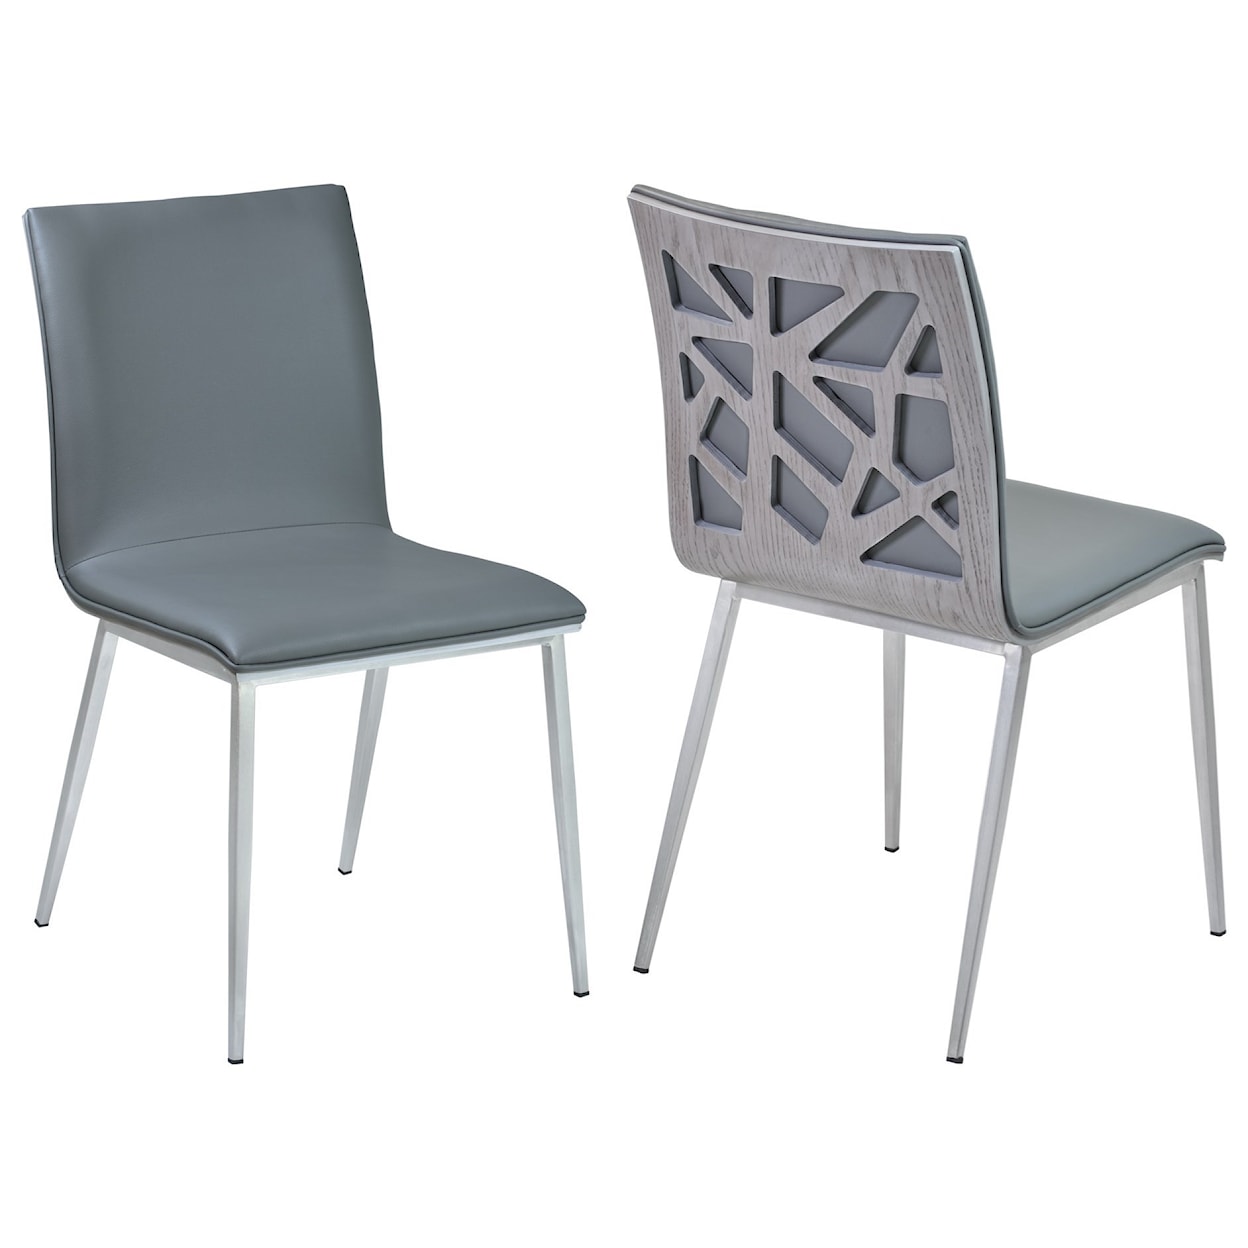 Armen Living Crystal Dining Chair in Gray Faux Leather - Set of 2